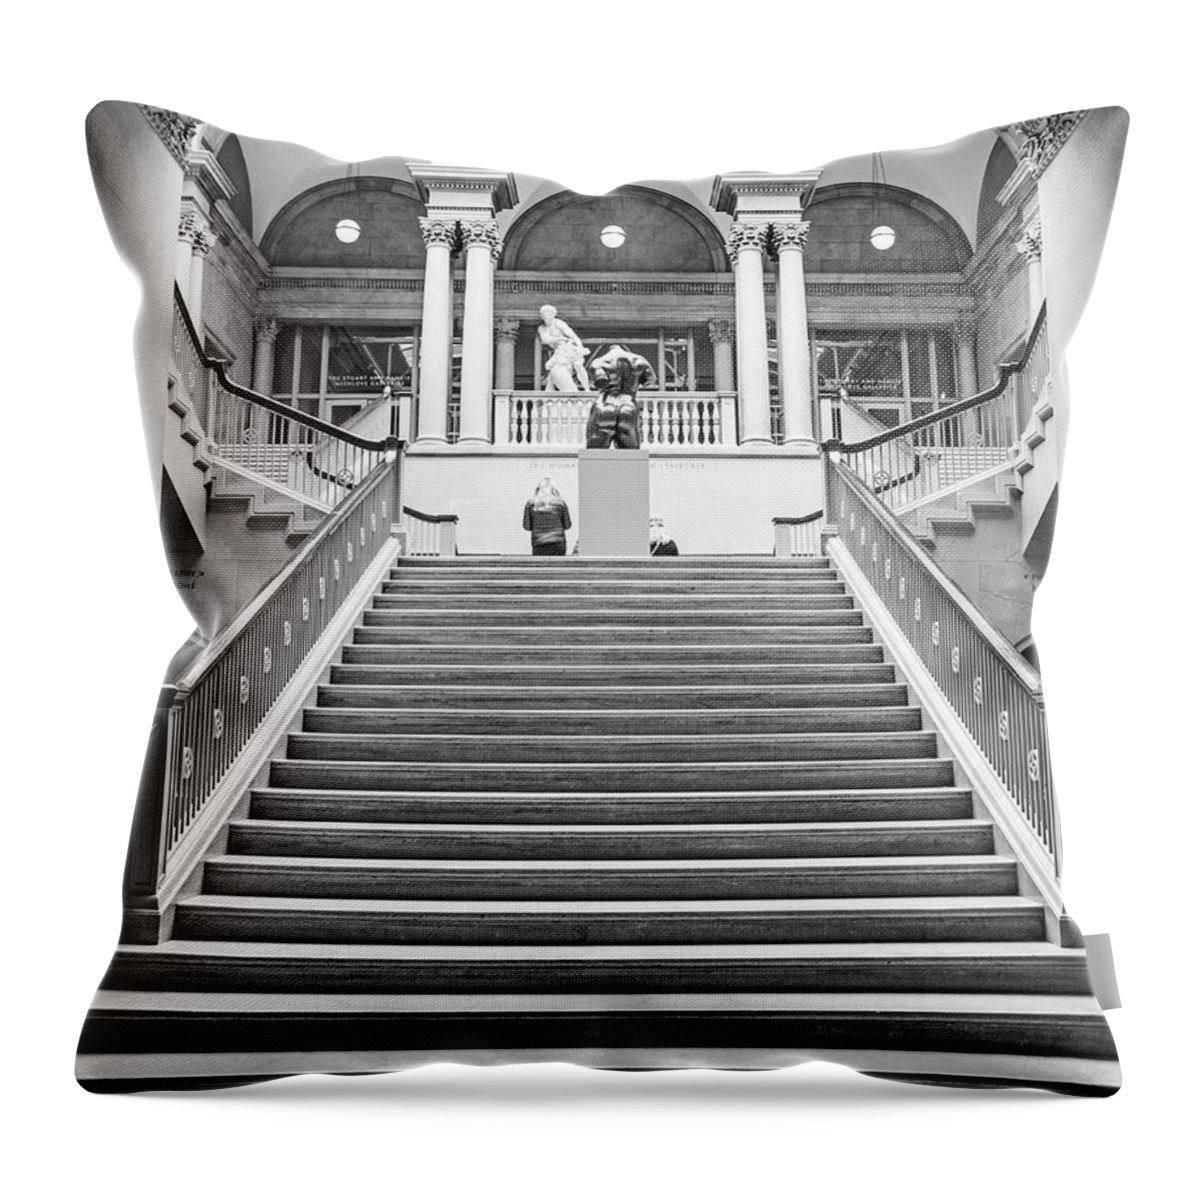 Staircase Throw Pillow featuring the photograph Grand Staircase at The Art Institute by Ira Marcus